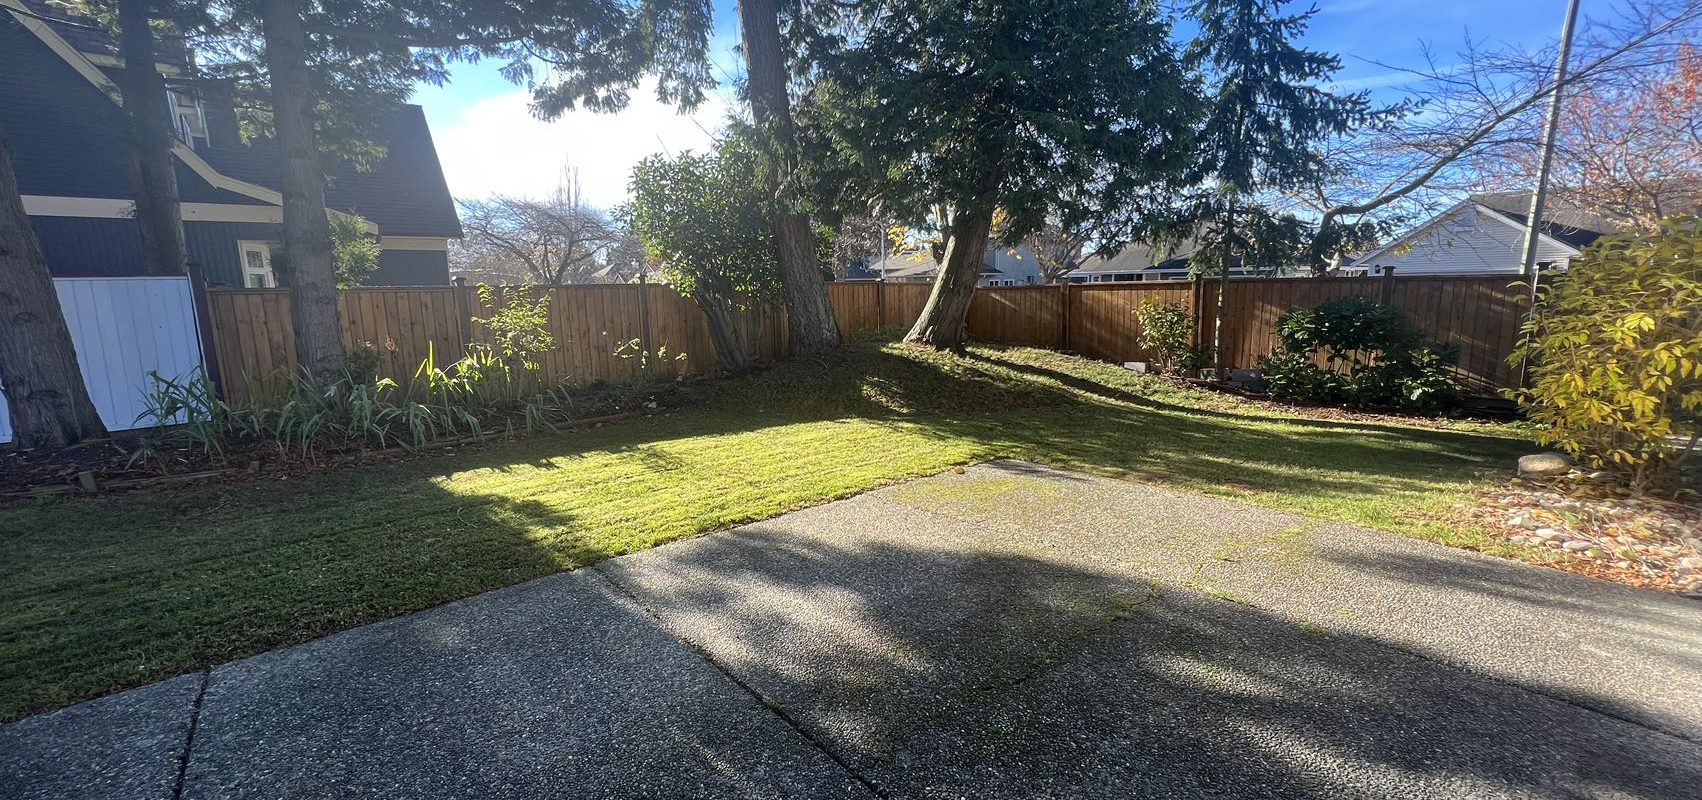 South Surrey Large 4Bd/3Ba Single Family House For Rent